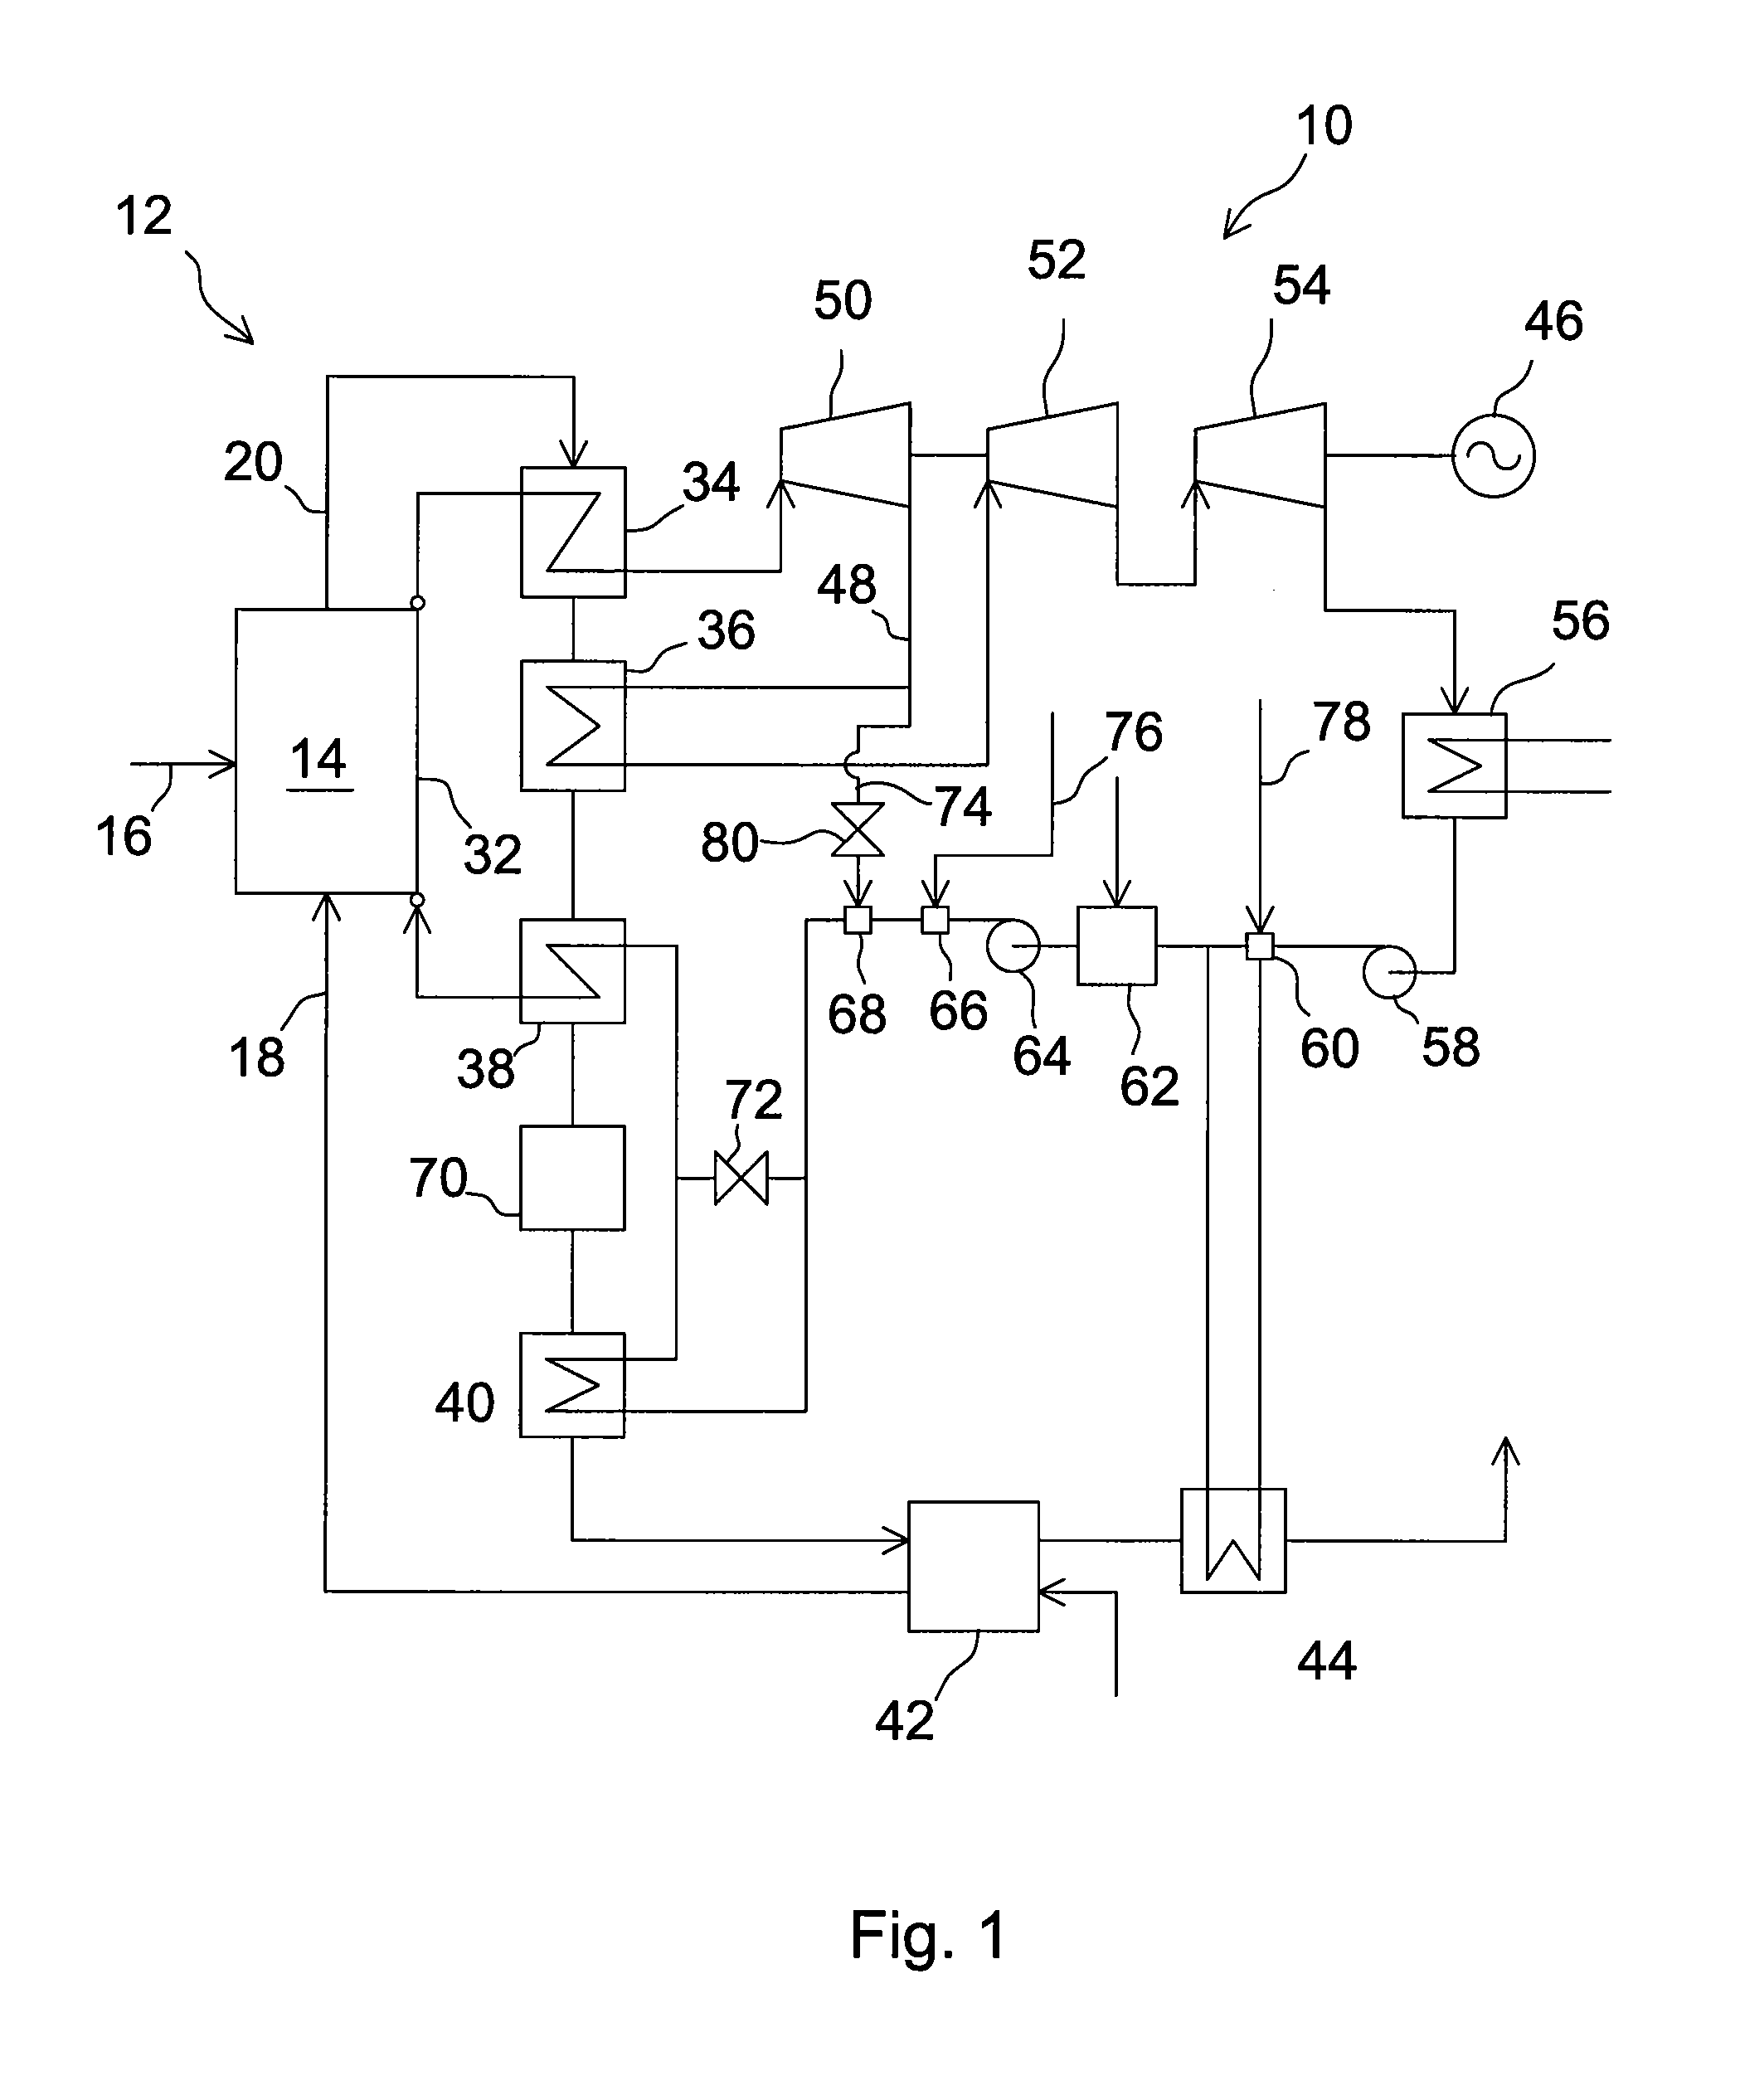 Method of Increasing the Performance of a Carbonaceous Fuel Combusting Boiler System